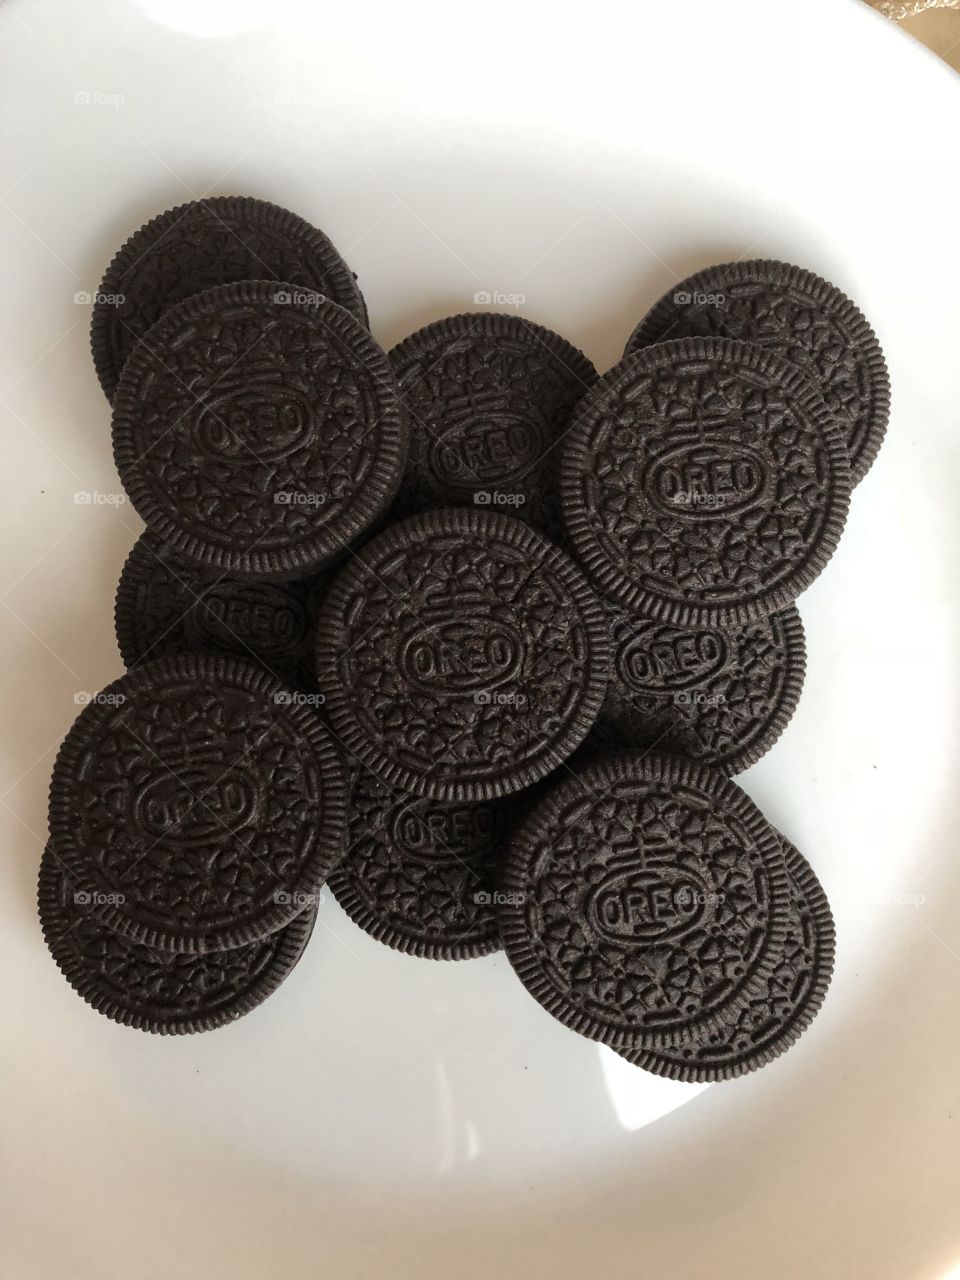 Oreo is the best